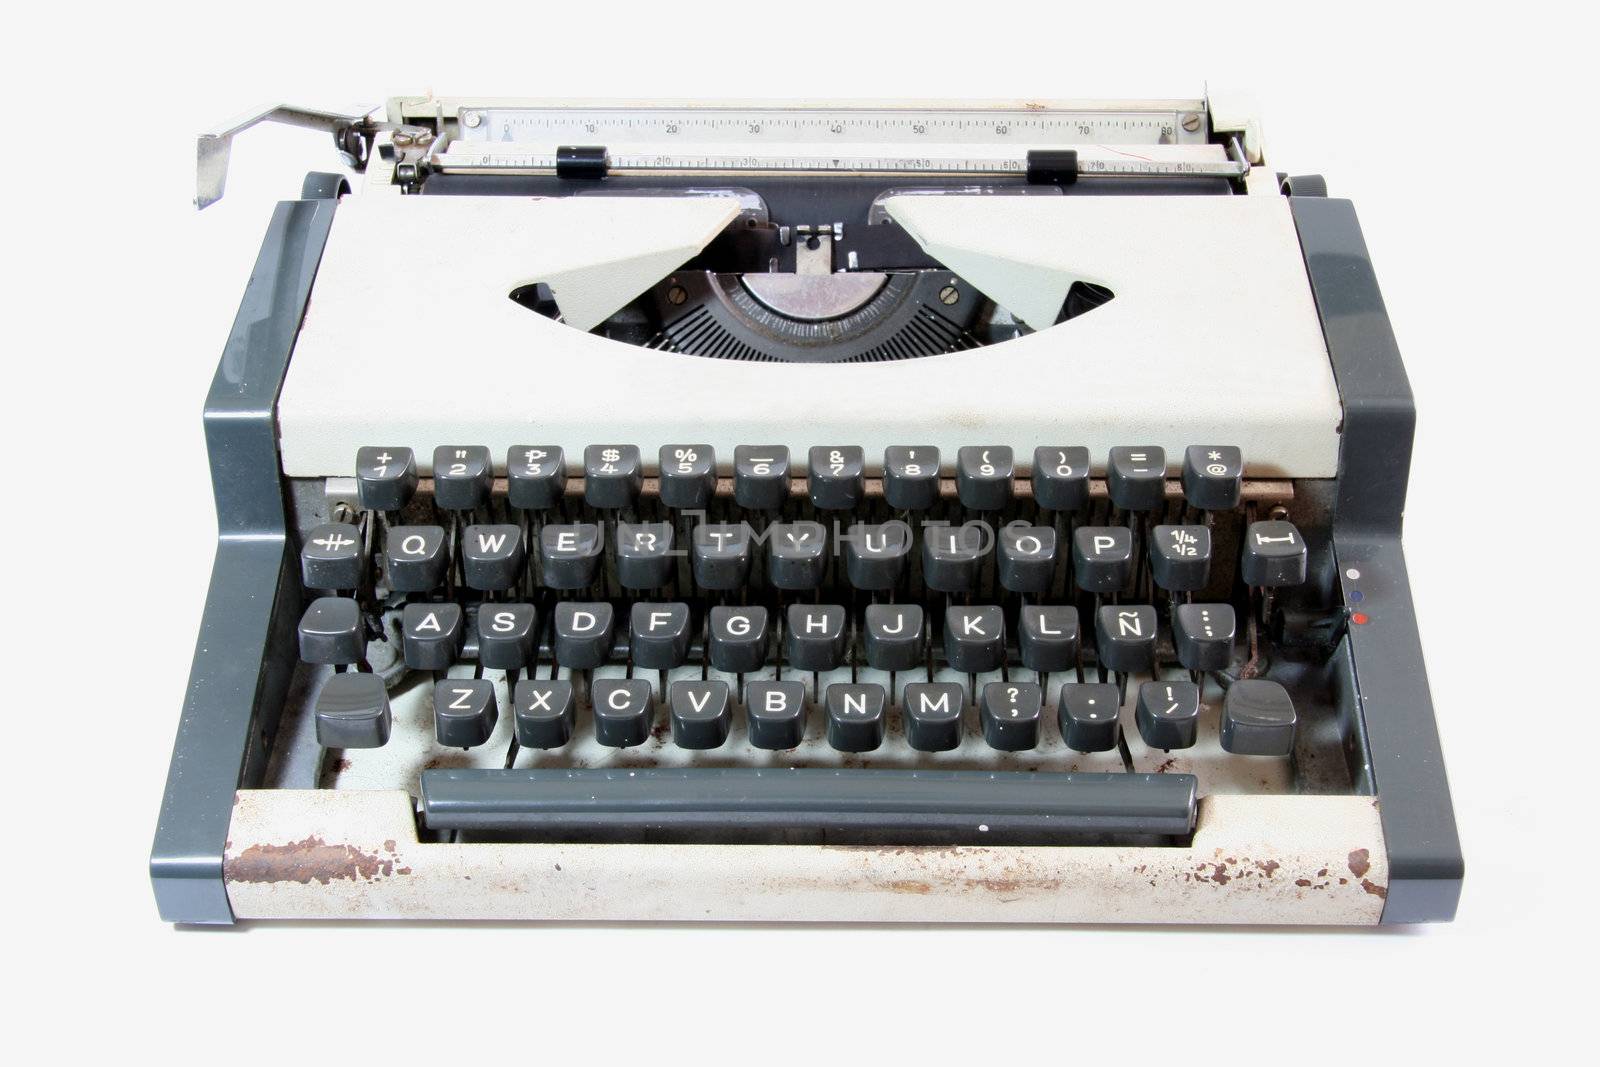 front view of an old manual typewriter
